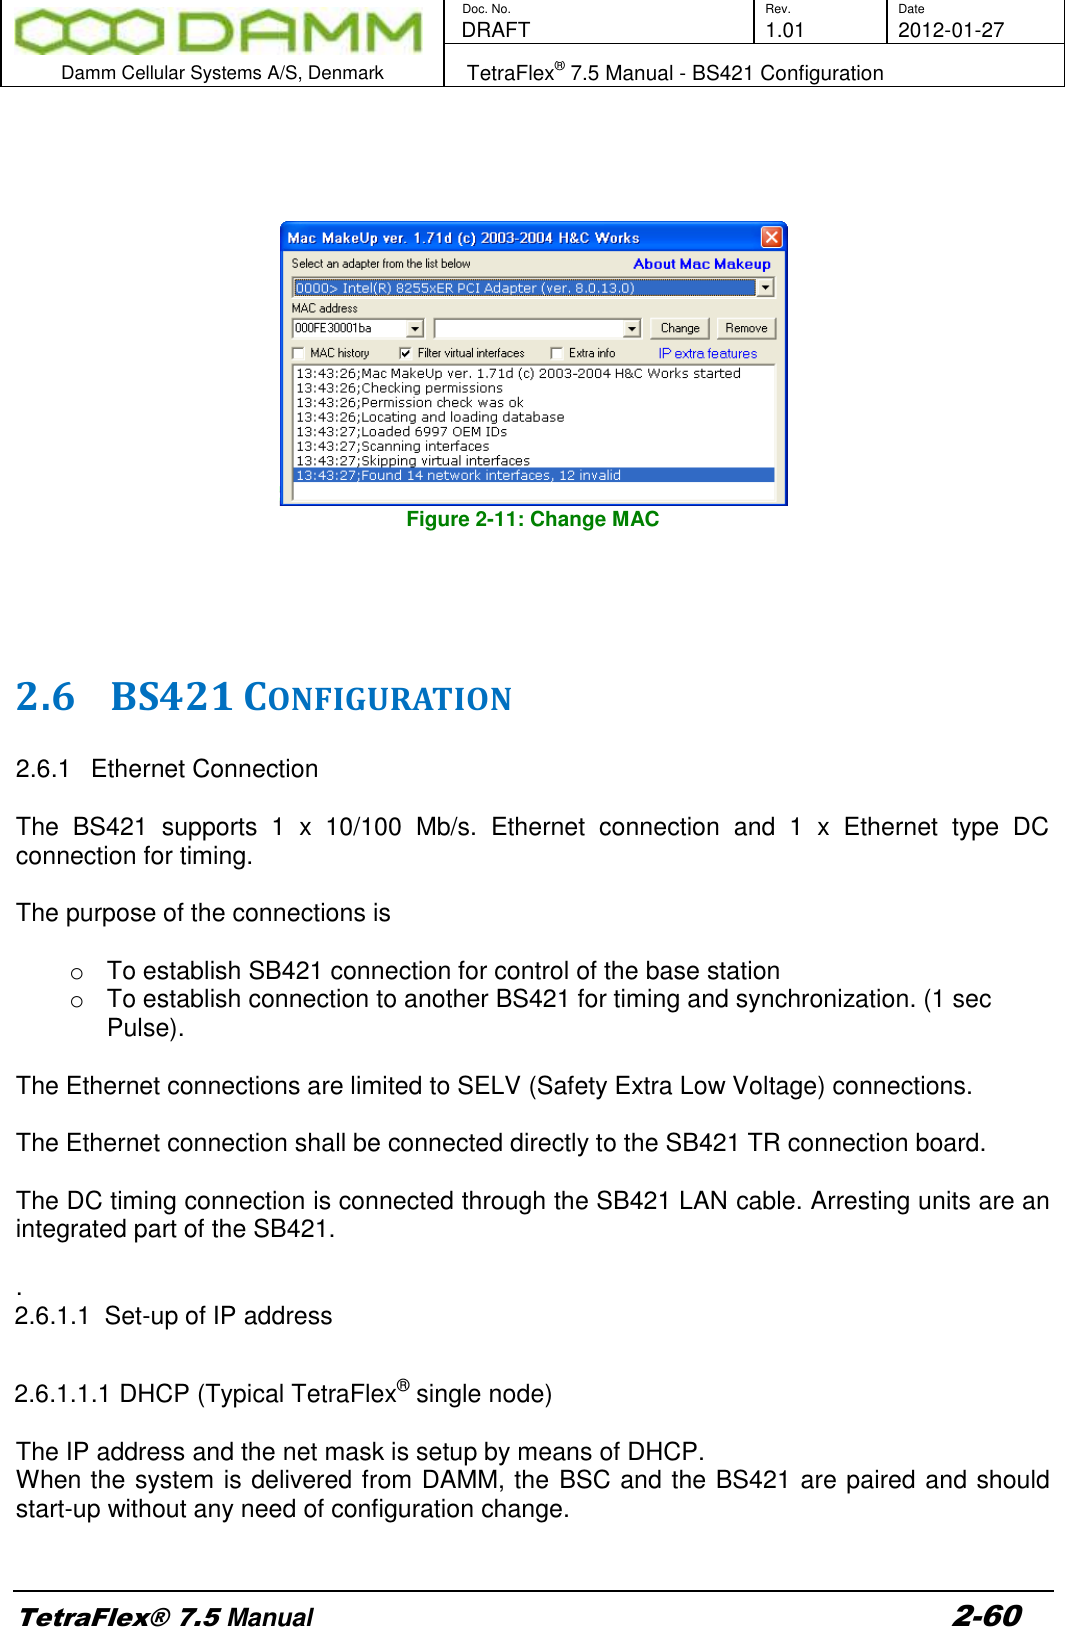        Doc. No. Rev. Date    DRAFT  1.01 2012-01-27  Damm Cellular Systems A/S, Denmark   TetraFlex® 7.5 Manual - BS421 Configuration  TetraFlex® 7.5 Manual 2-60      Figure 2-11: Change MAC     2.6 BS421 CONFIGURATION  2.6.1  Ethernet Connection   The  BS421  supports  1  x  10/100  Mb/s.  Ethernet  connection  and  1  x  Ethernet  type  DC connection for timing.   The purpose of the connections is  o  To establish SB421 connection for control of the base station o  To establish connection to another BS421 for timing and synchronization. (1 sec Pulse).  The Ethernet connections are limited to SELV (Safety Extra Low Voltage) connections.   The Ethernet connection shall be connected directly to the SB421 TR connection board.  The DC timing connection is connected through the SB421 LAN cable. Arresting units are an integrated part of the SB421.  . 2.6.1.1  Set-up of IP address  2.6.1.1.1 DHCP (Typical TetraFlex® single node)  The IP address and the net mask is setup by means of DHCP.  When the system is delivered from DAMM, the BSC and the BS421 are paired and should start-up without any need of configuration change.  